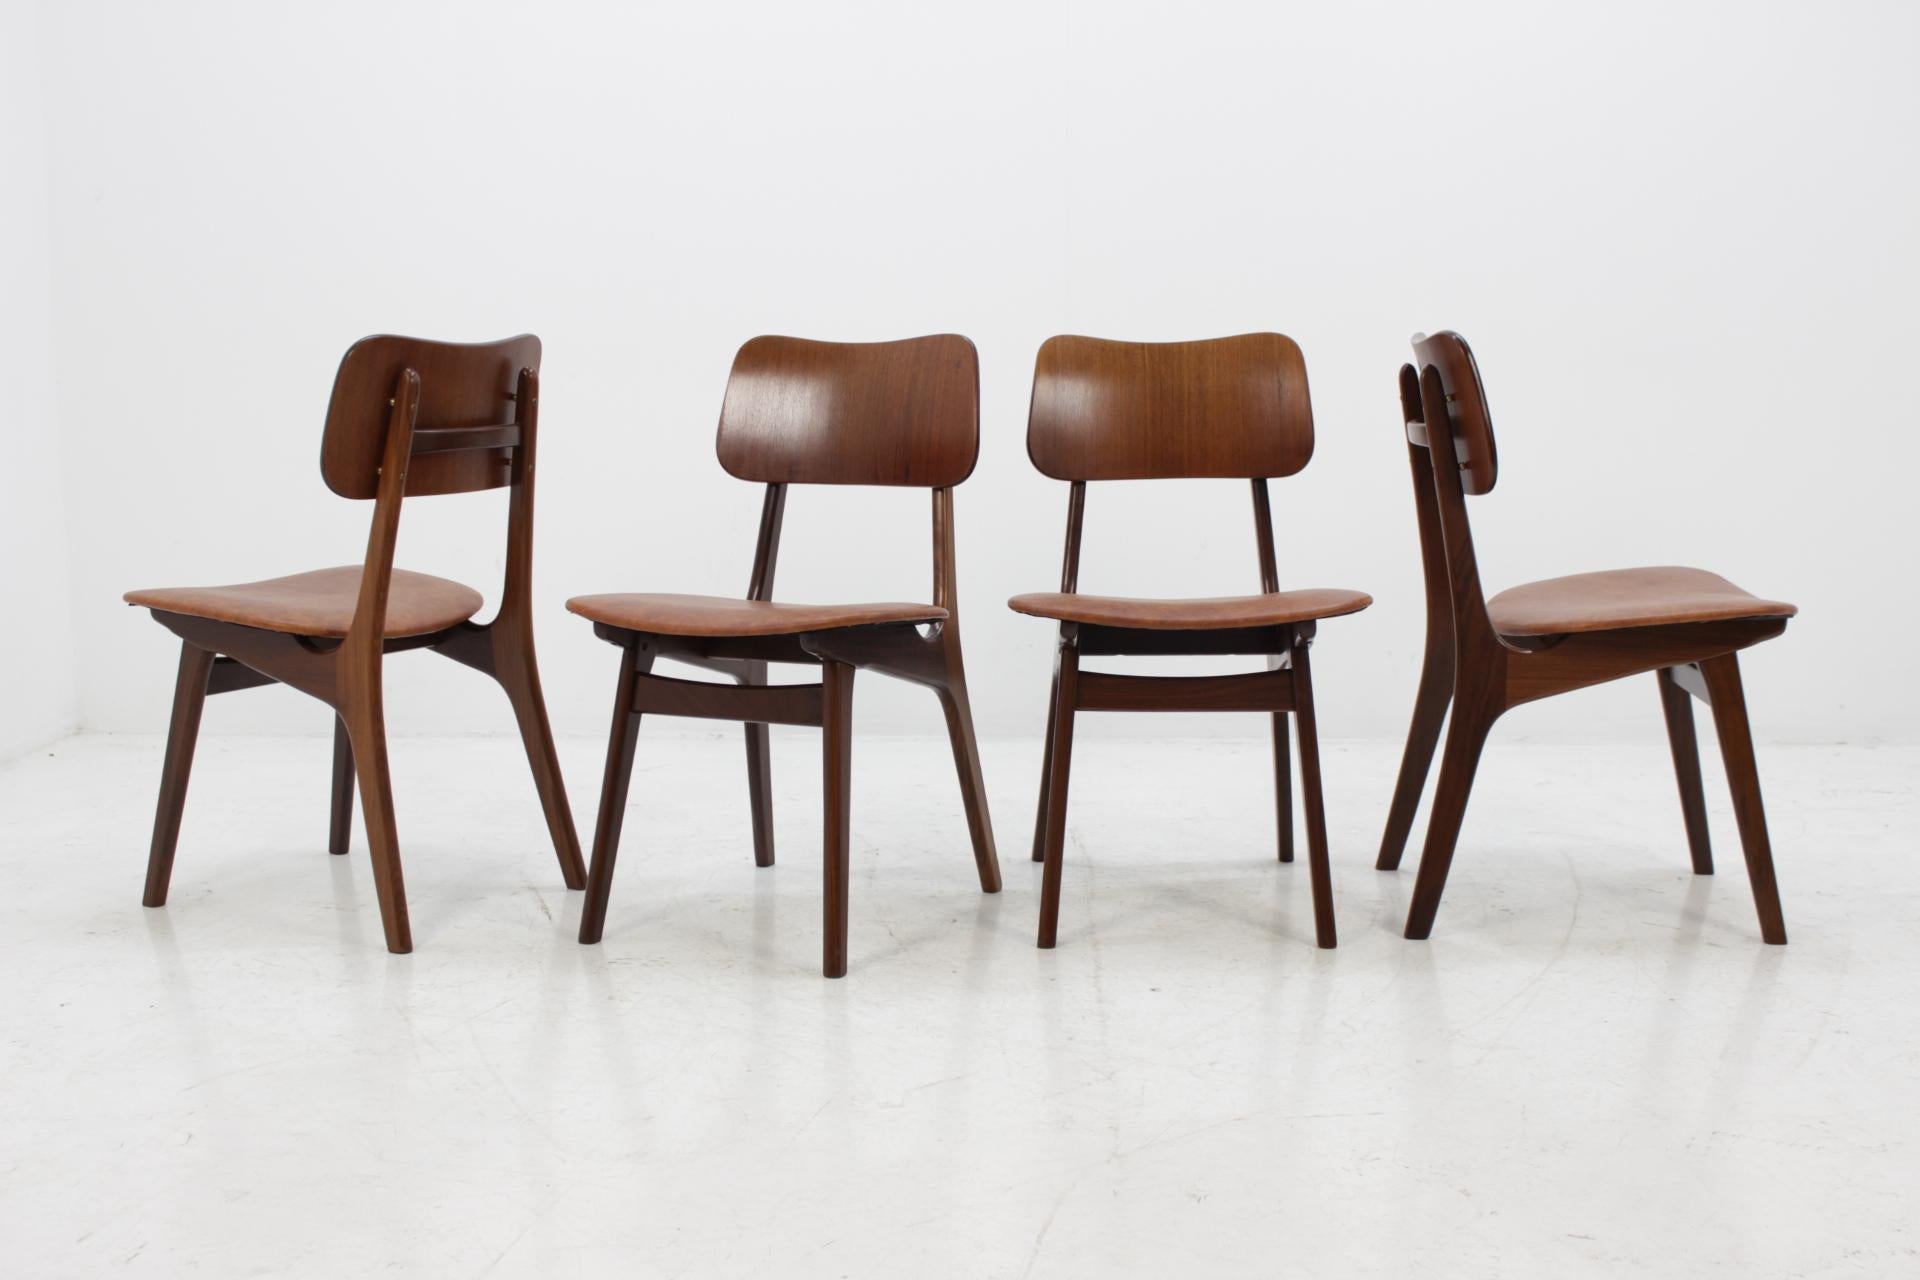 The frame of each one is made from solid teak wood. New leather upholstery. Carefully refurbished.